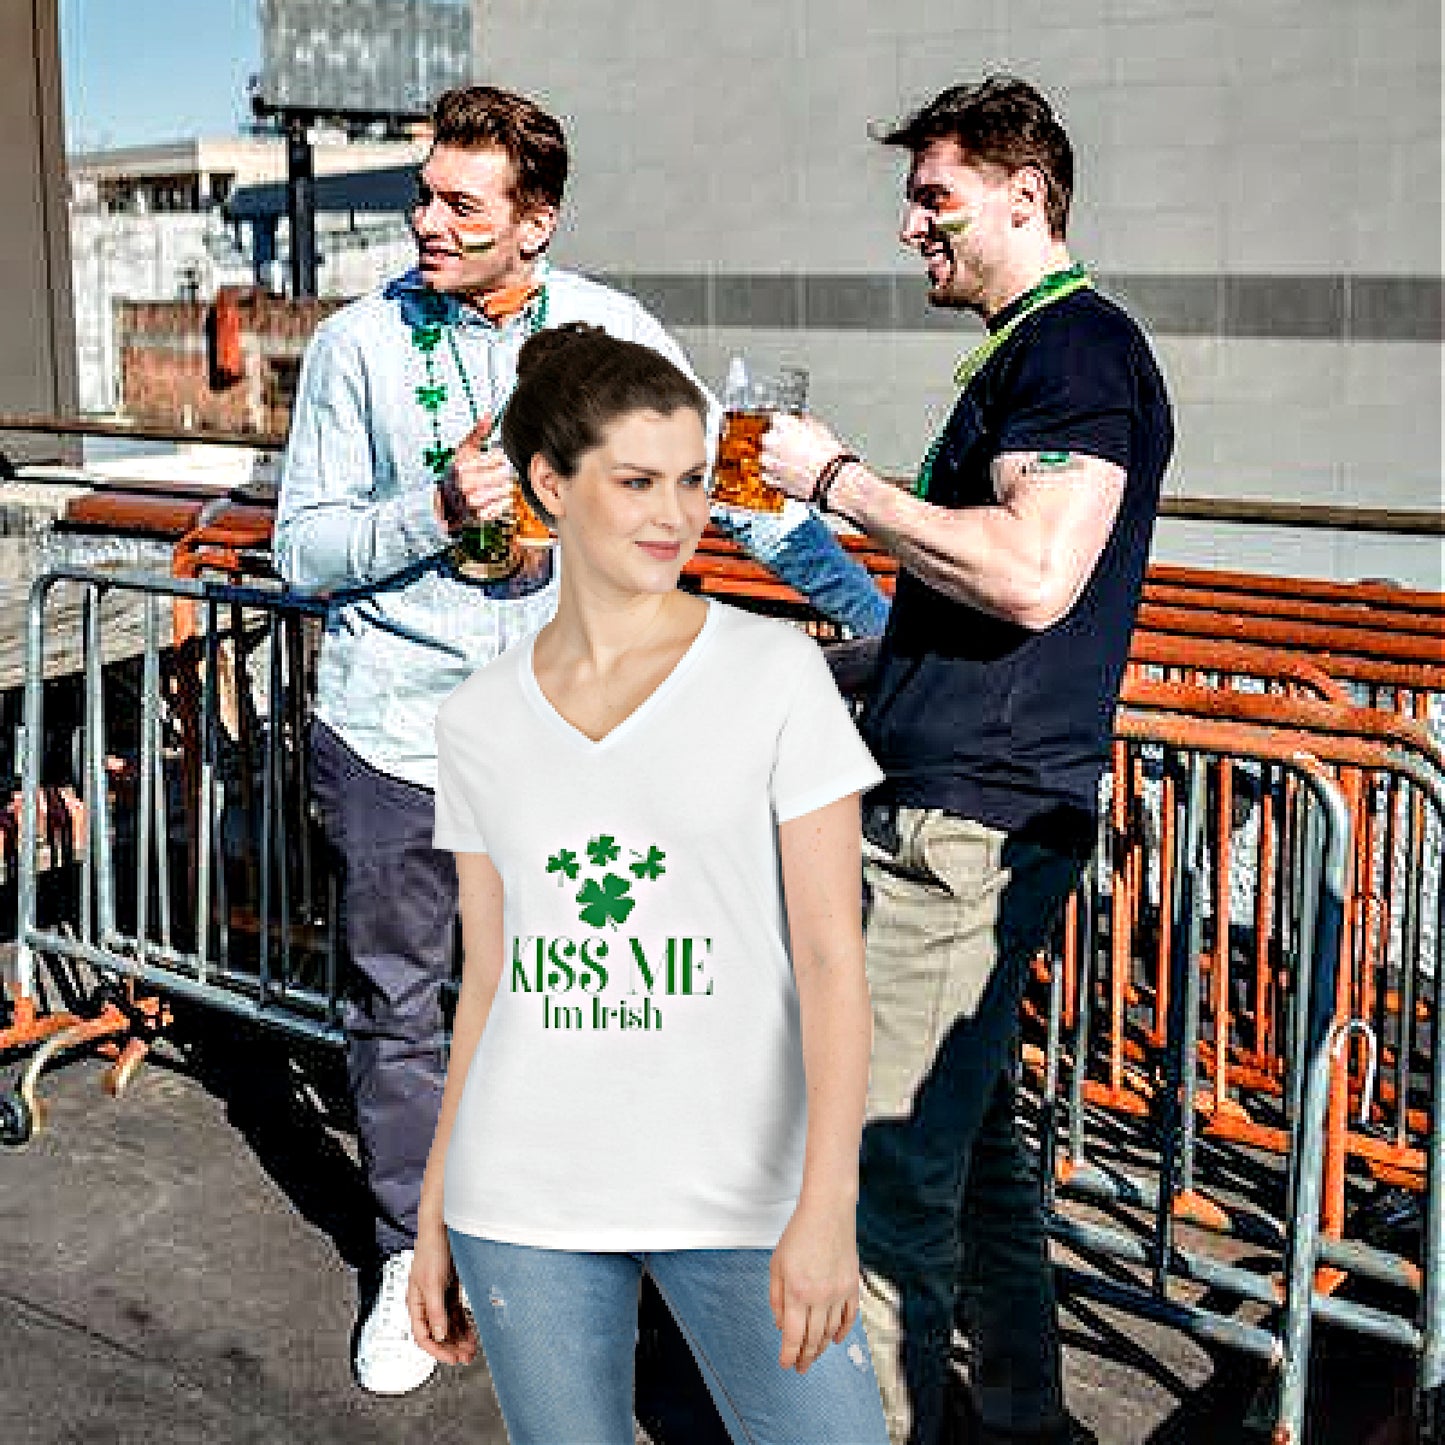 Mock up of woman wearing the white t-shirt with 2 guys in the background